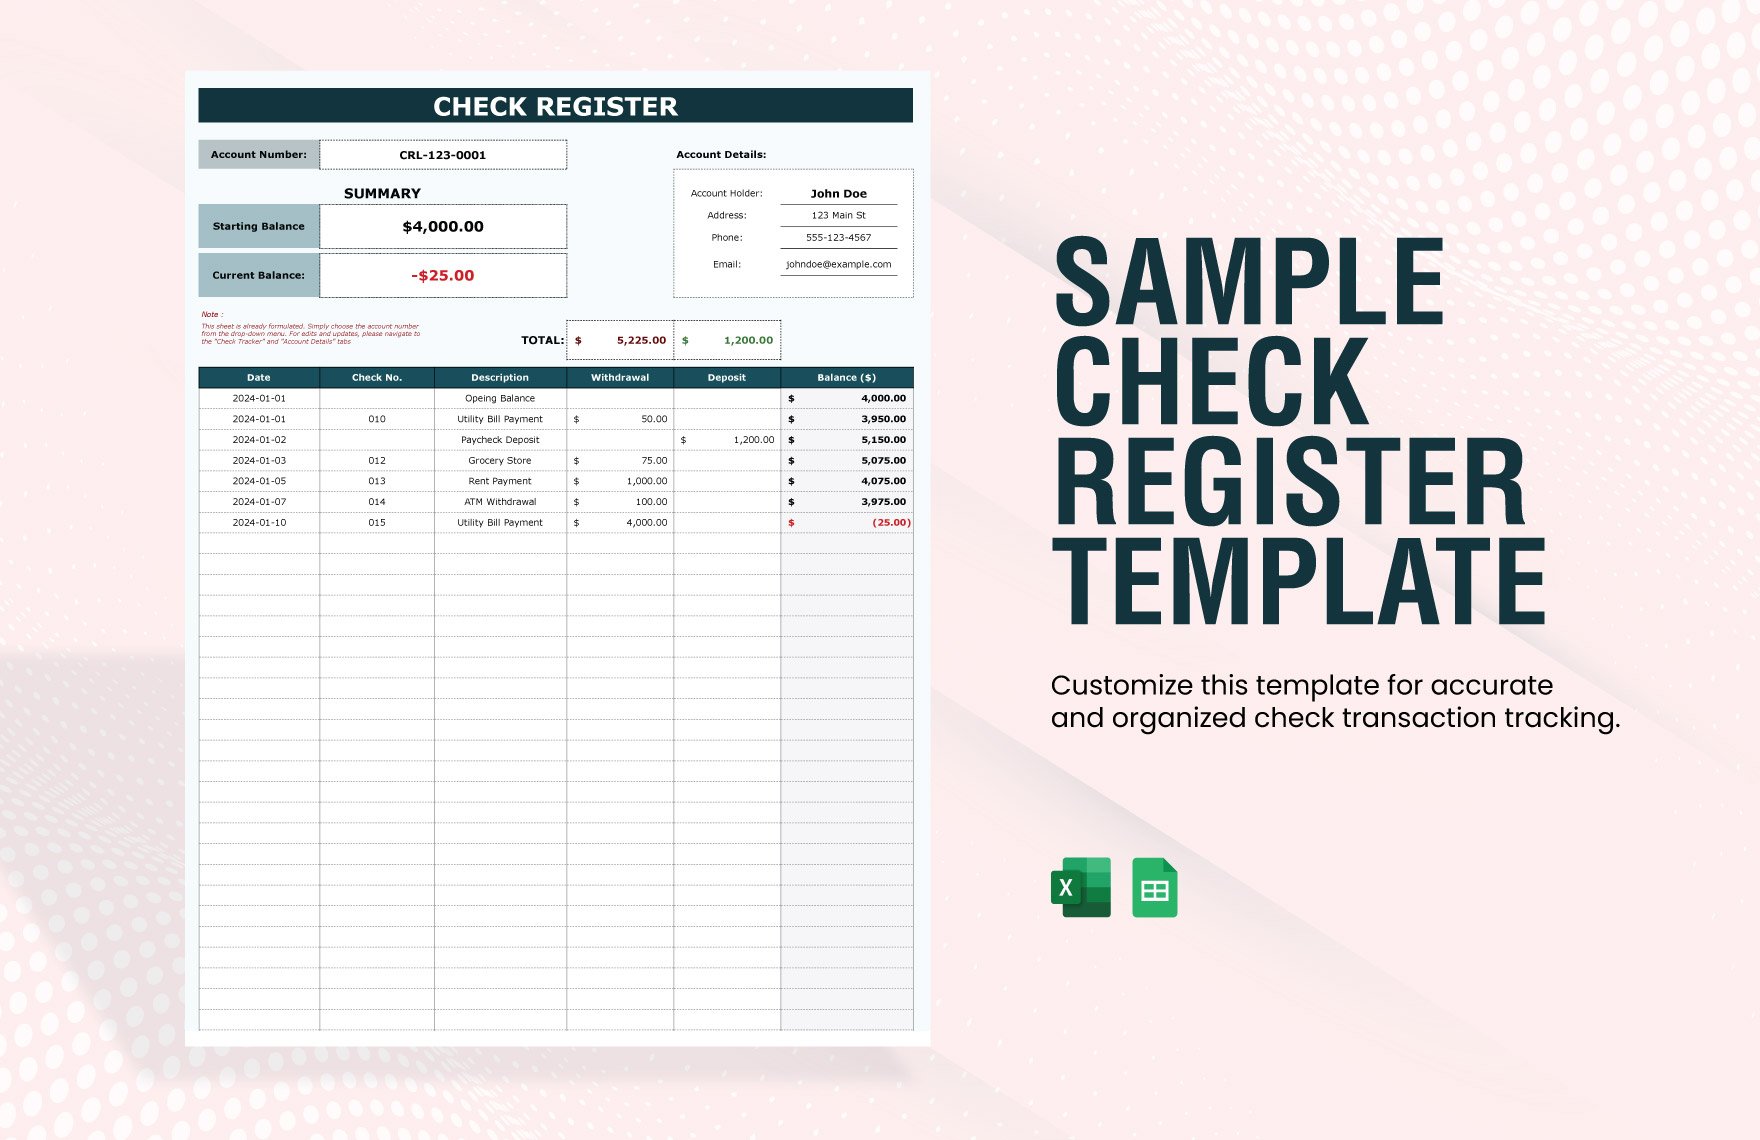 Sample Check Register Template in Excel, Google Sheets